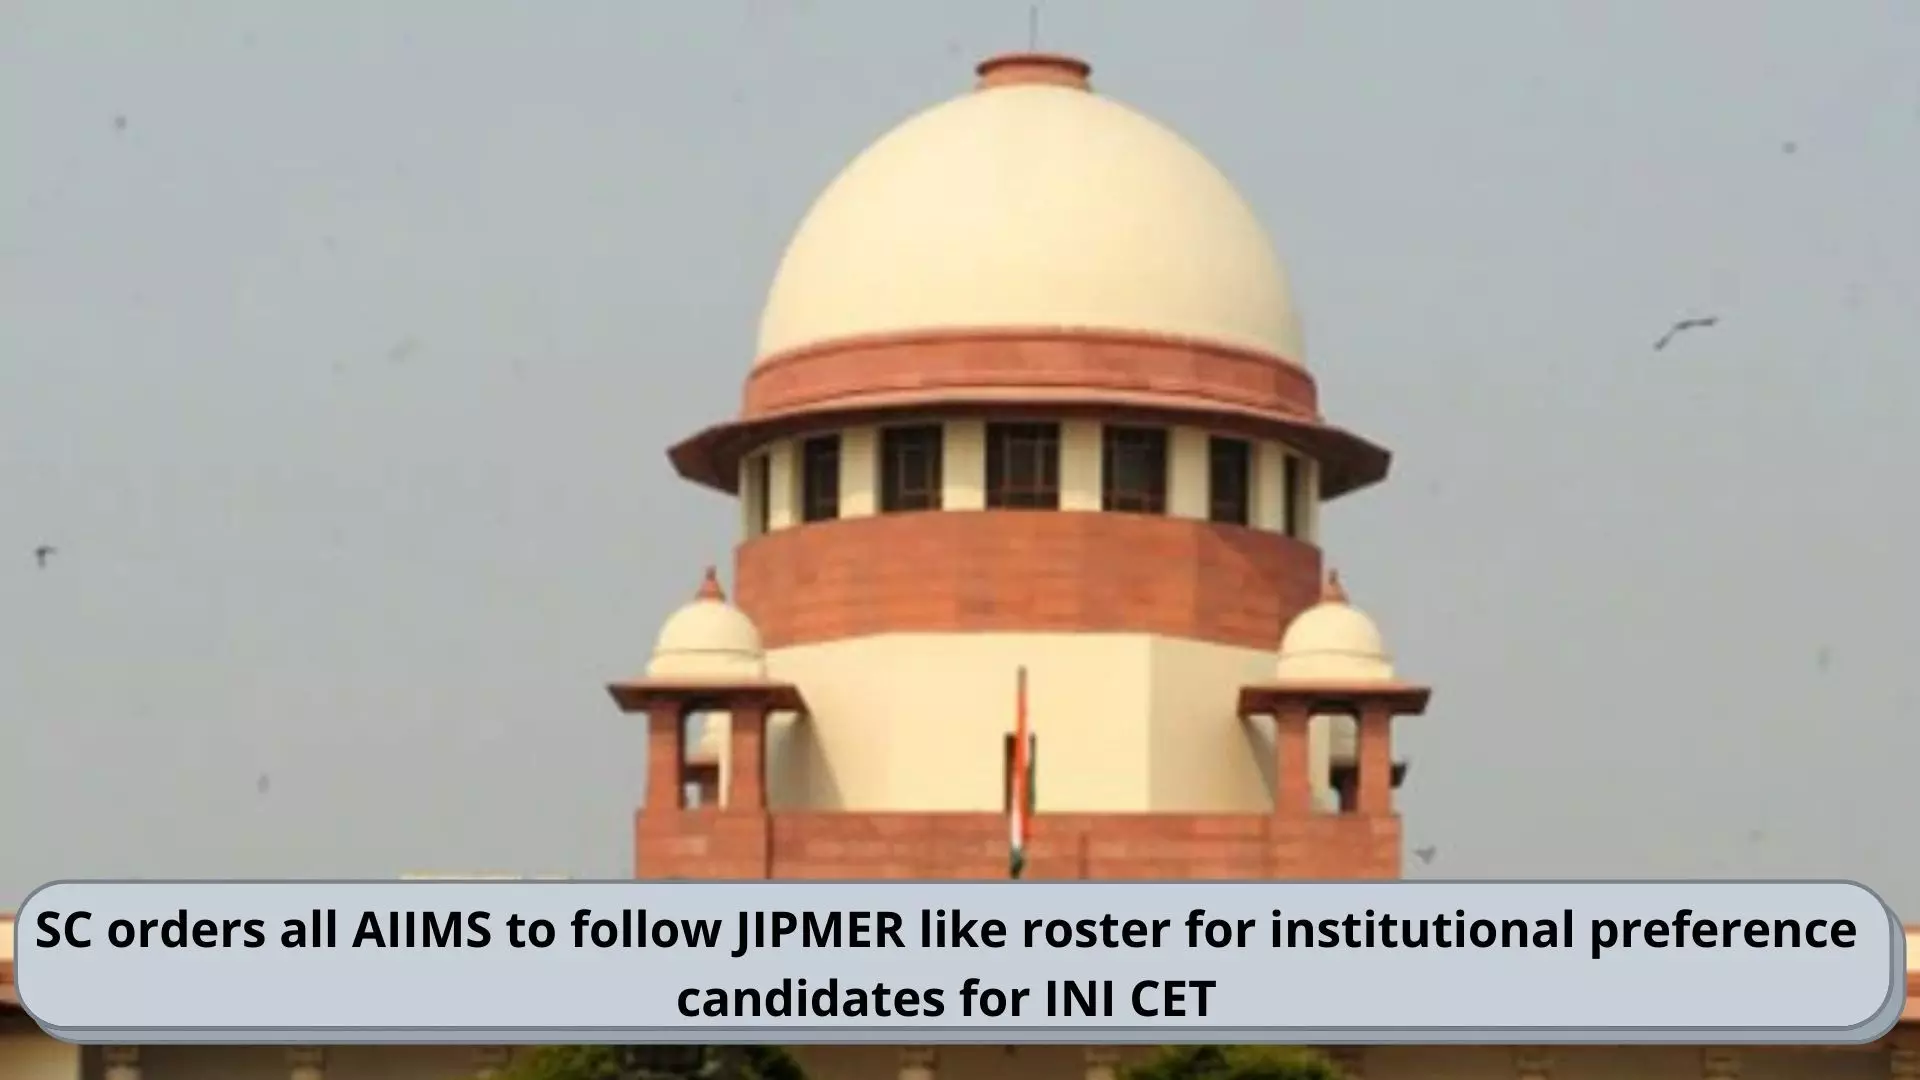 SC orders all AIIMS to follow JIPMER like roster for institutional preference candidates for INI CET